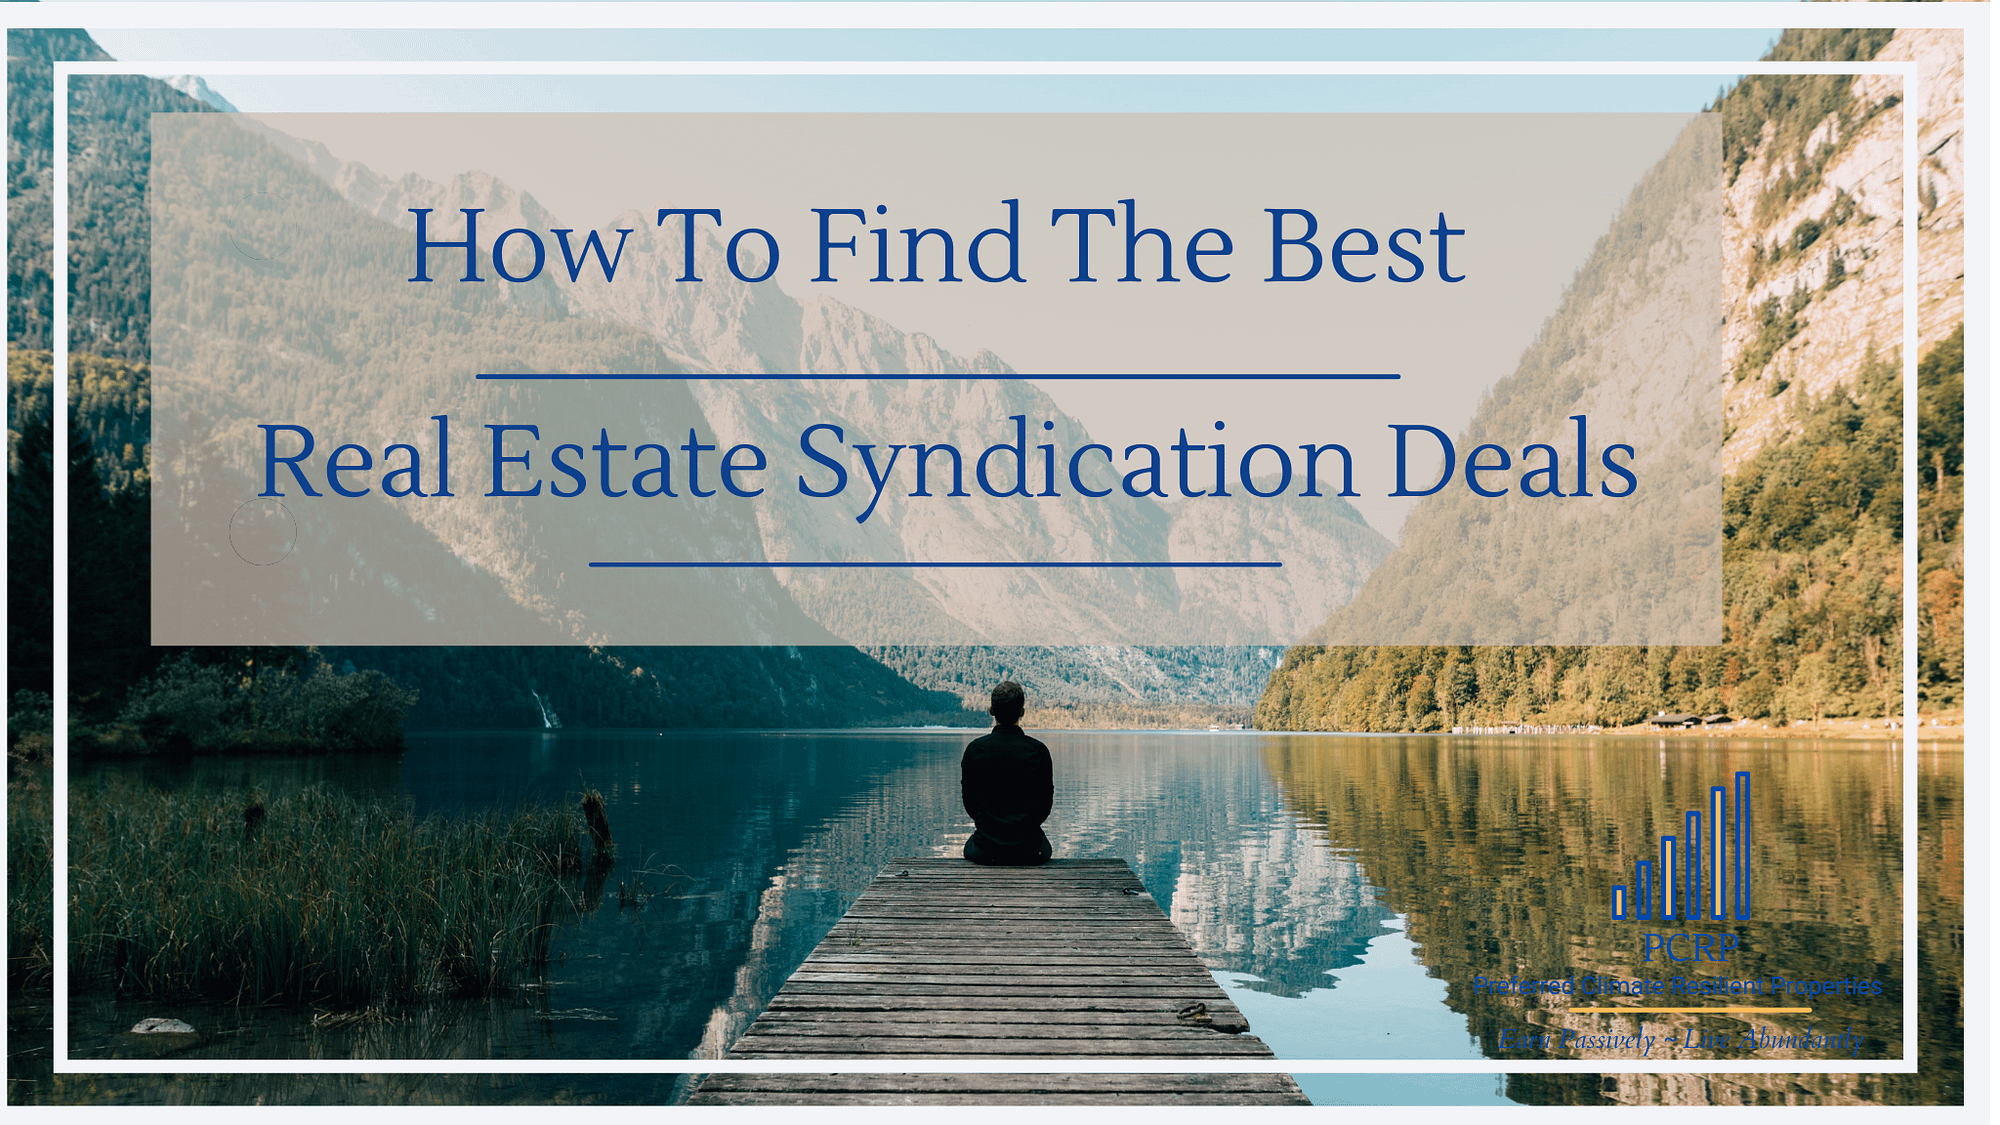 How to find real estate syndication deals